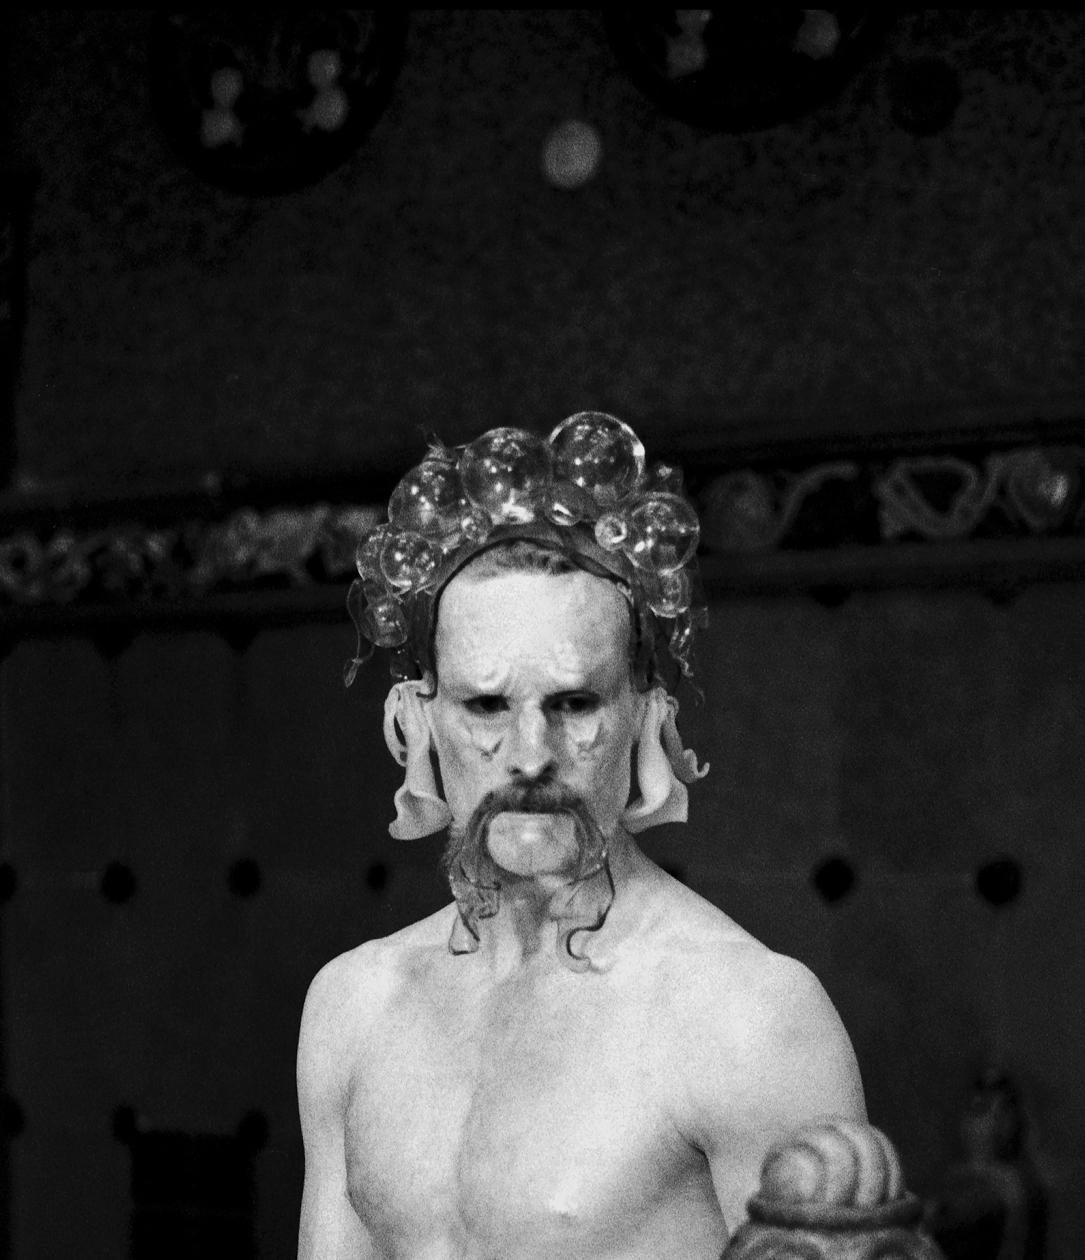 Matthew Barney, Cremaster 5, Gellert Bath House, Budapest, 1996, by Michael James O’Brien
Archival Inkjet Print on fine art paper
Paper size: 24 H x 17 W inches.
Image size. 17 H x 12.5 W inches with 2 inches of white borders around. 
Edition of 9 +